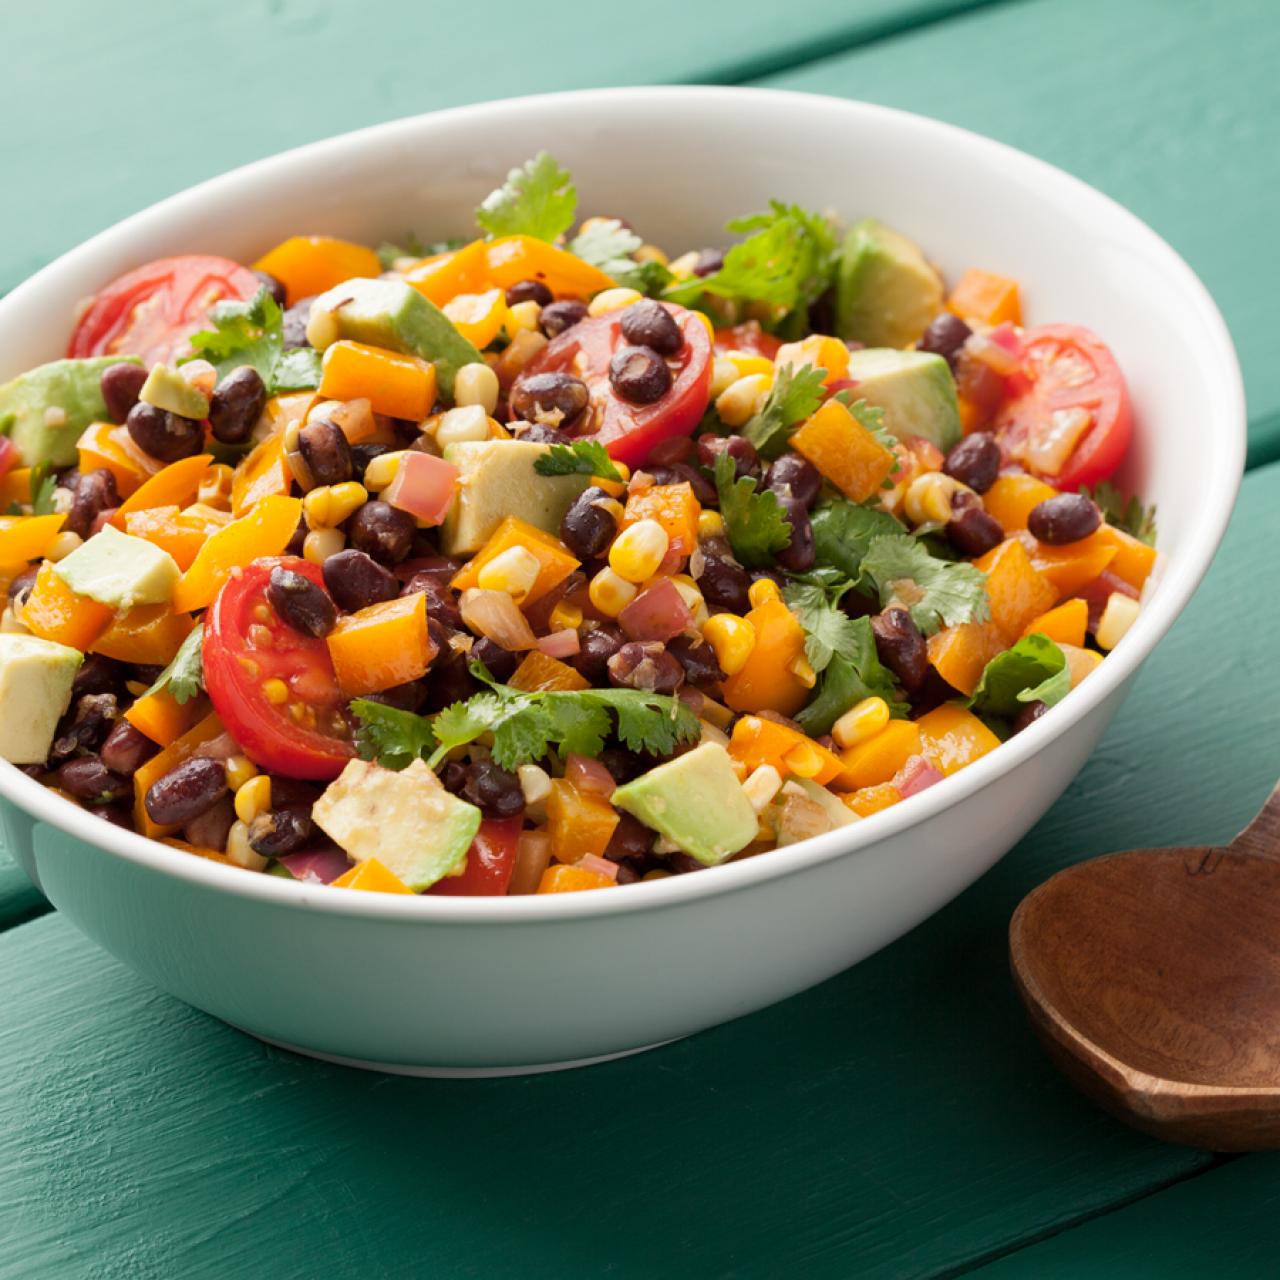 Southwest Black Bean and Ruby Wild Blend™ Shaker Salad - Healthy School  Recipes